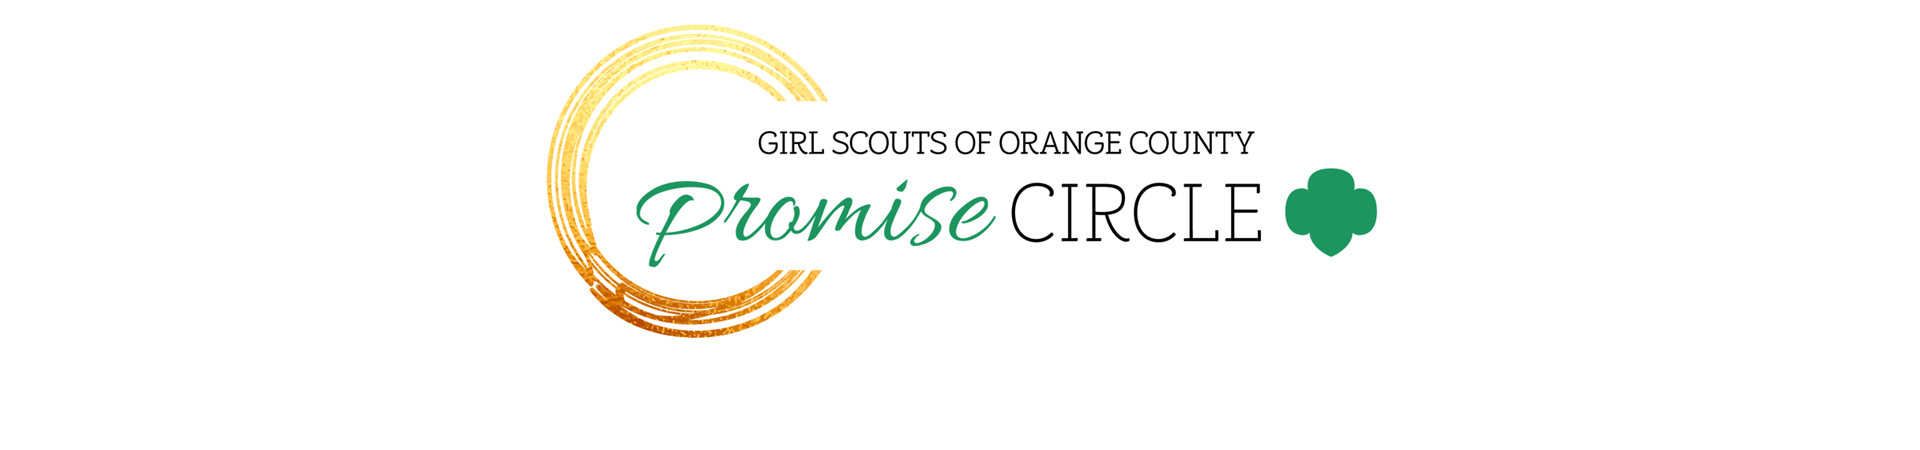  Girl Scouts of Orange County's Promise Circle 